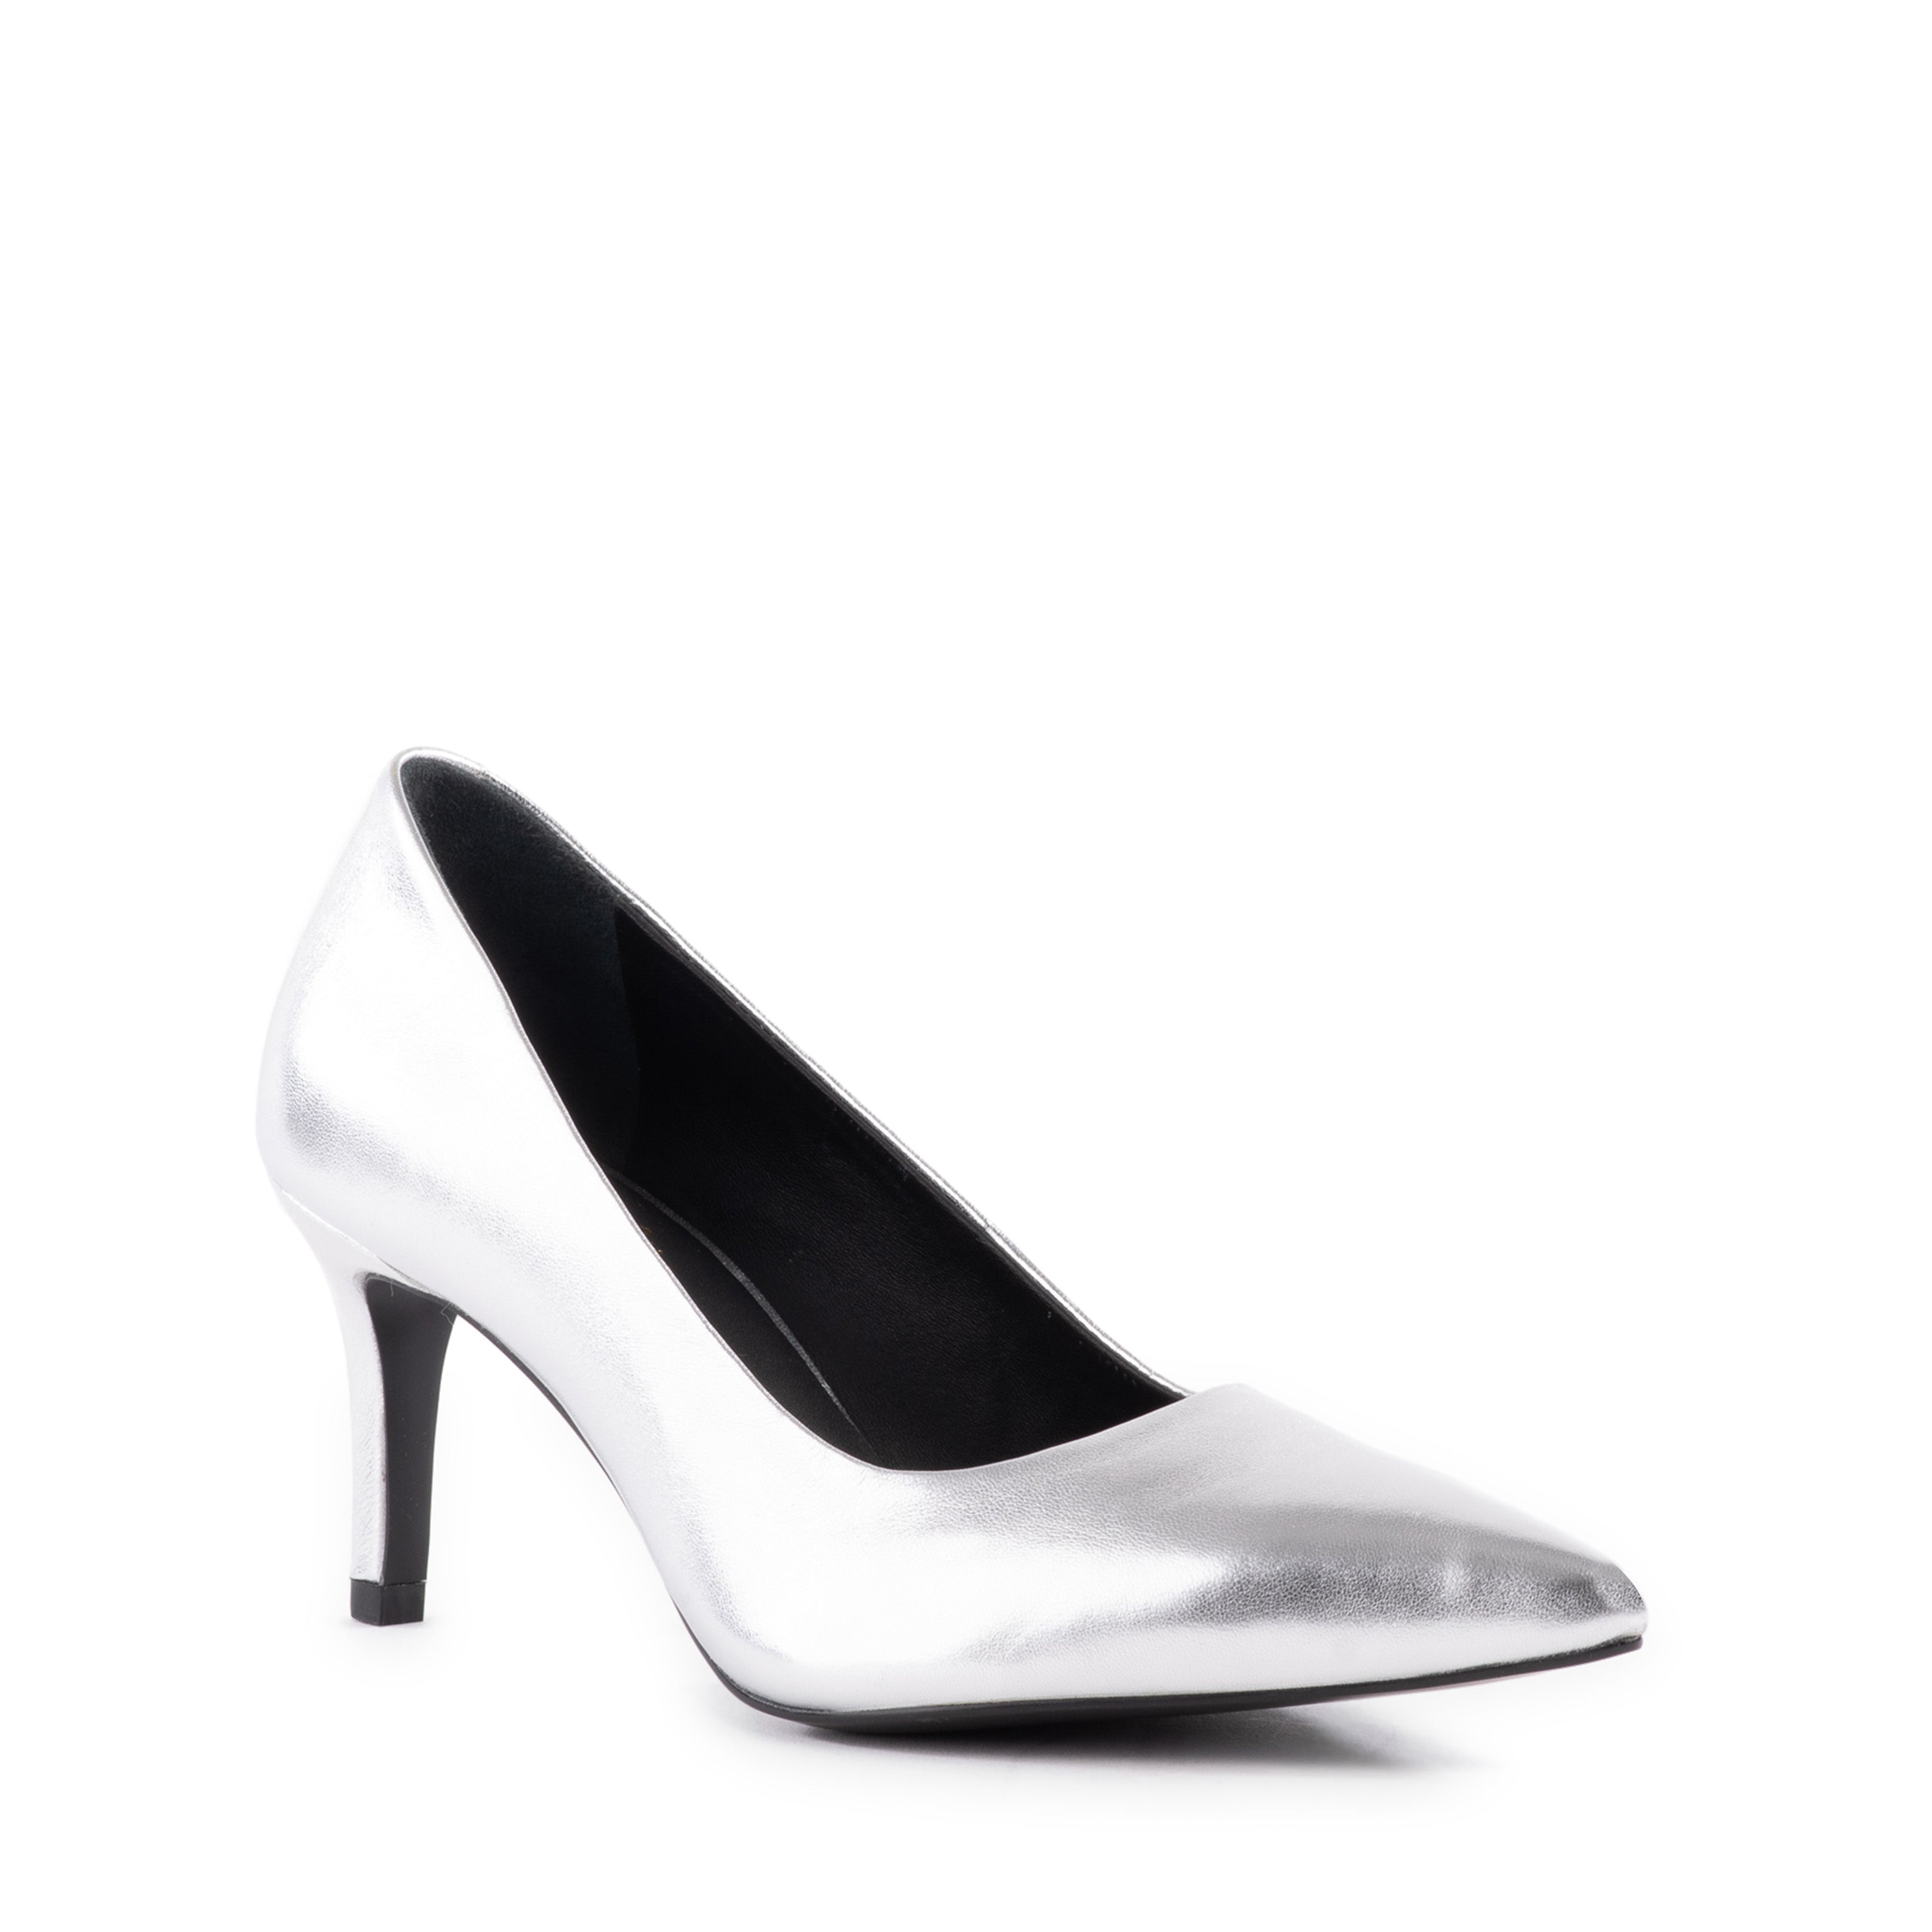 Glamorous Silver Metallic Pointed Heeled Shoes | Lyst